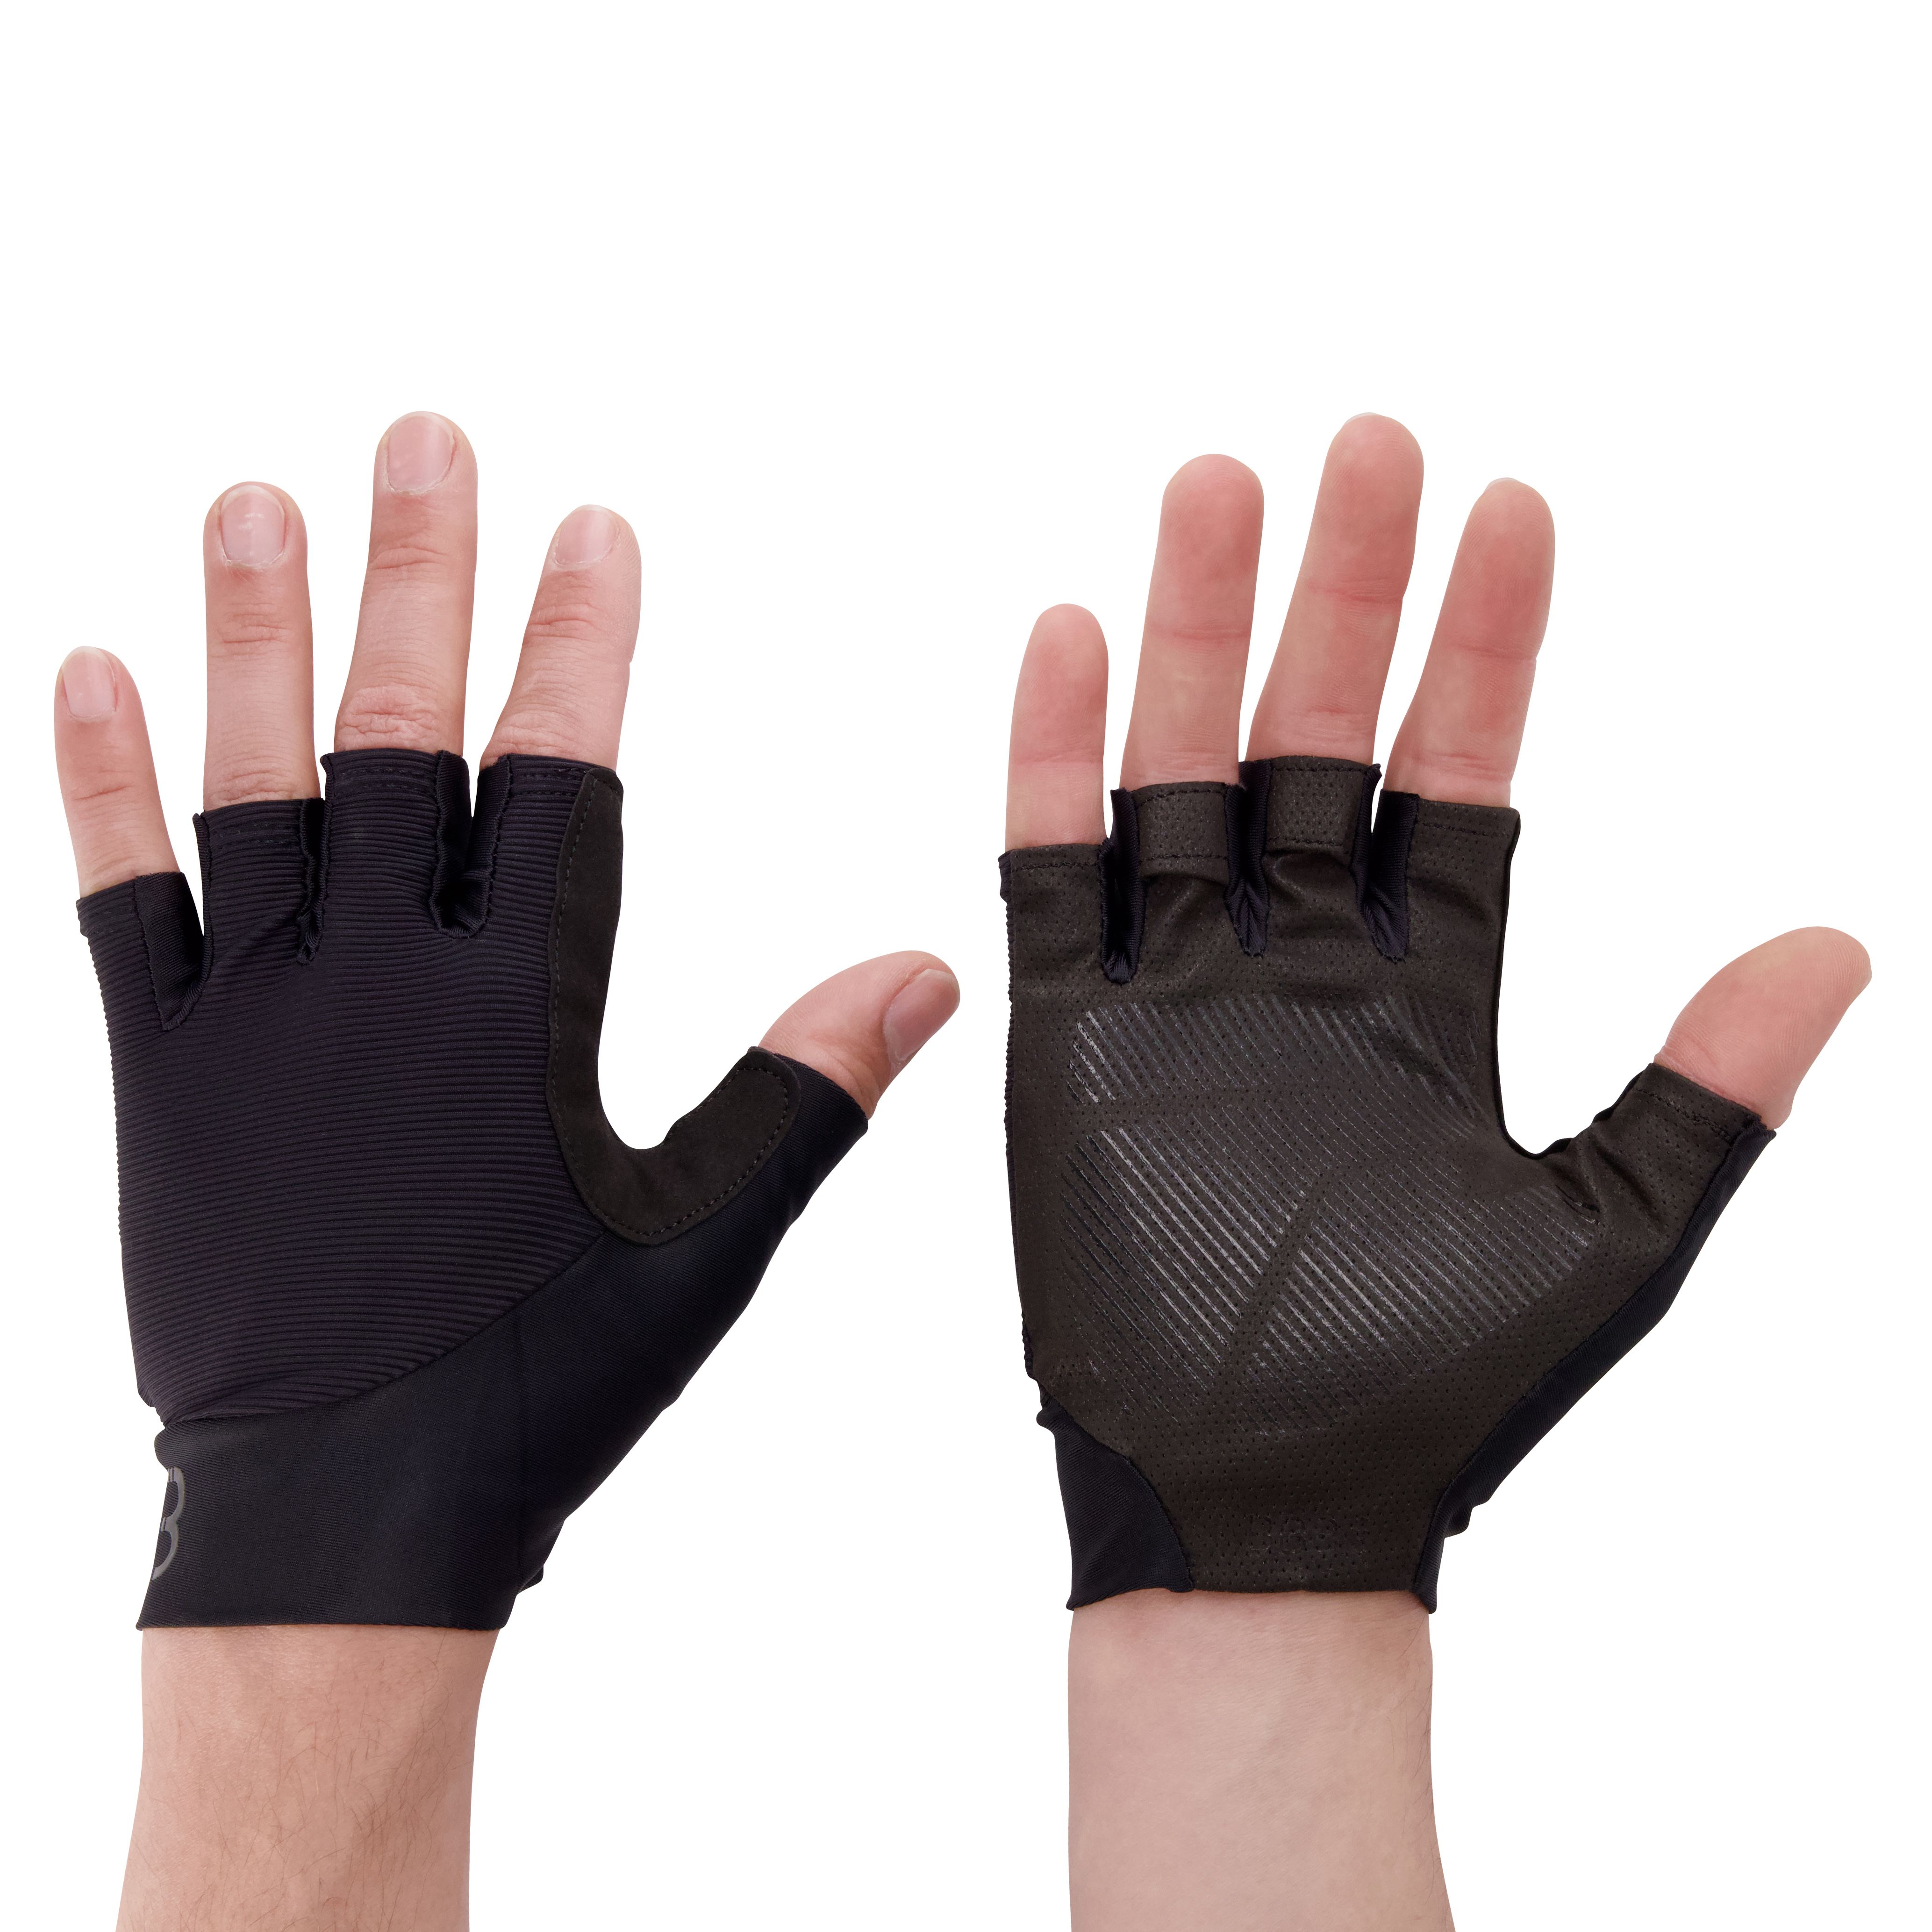 Course gloves